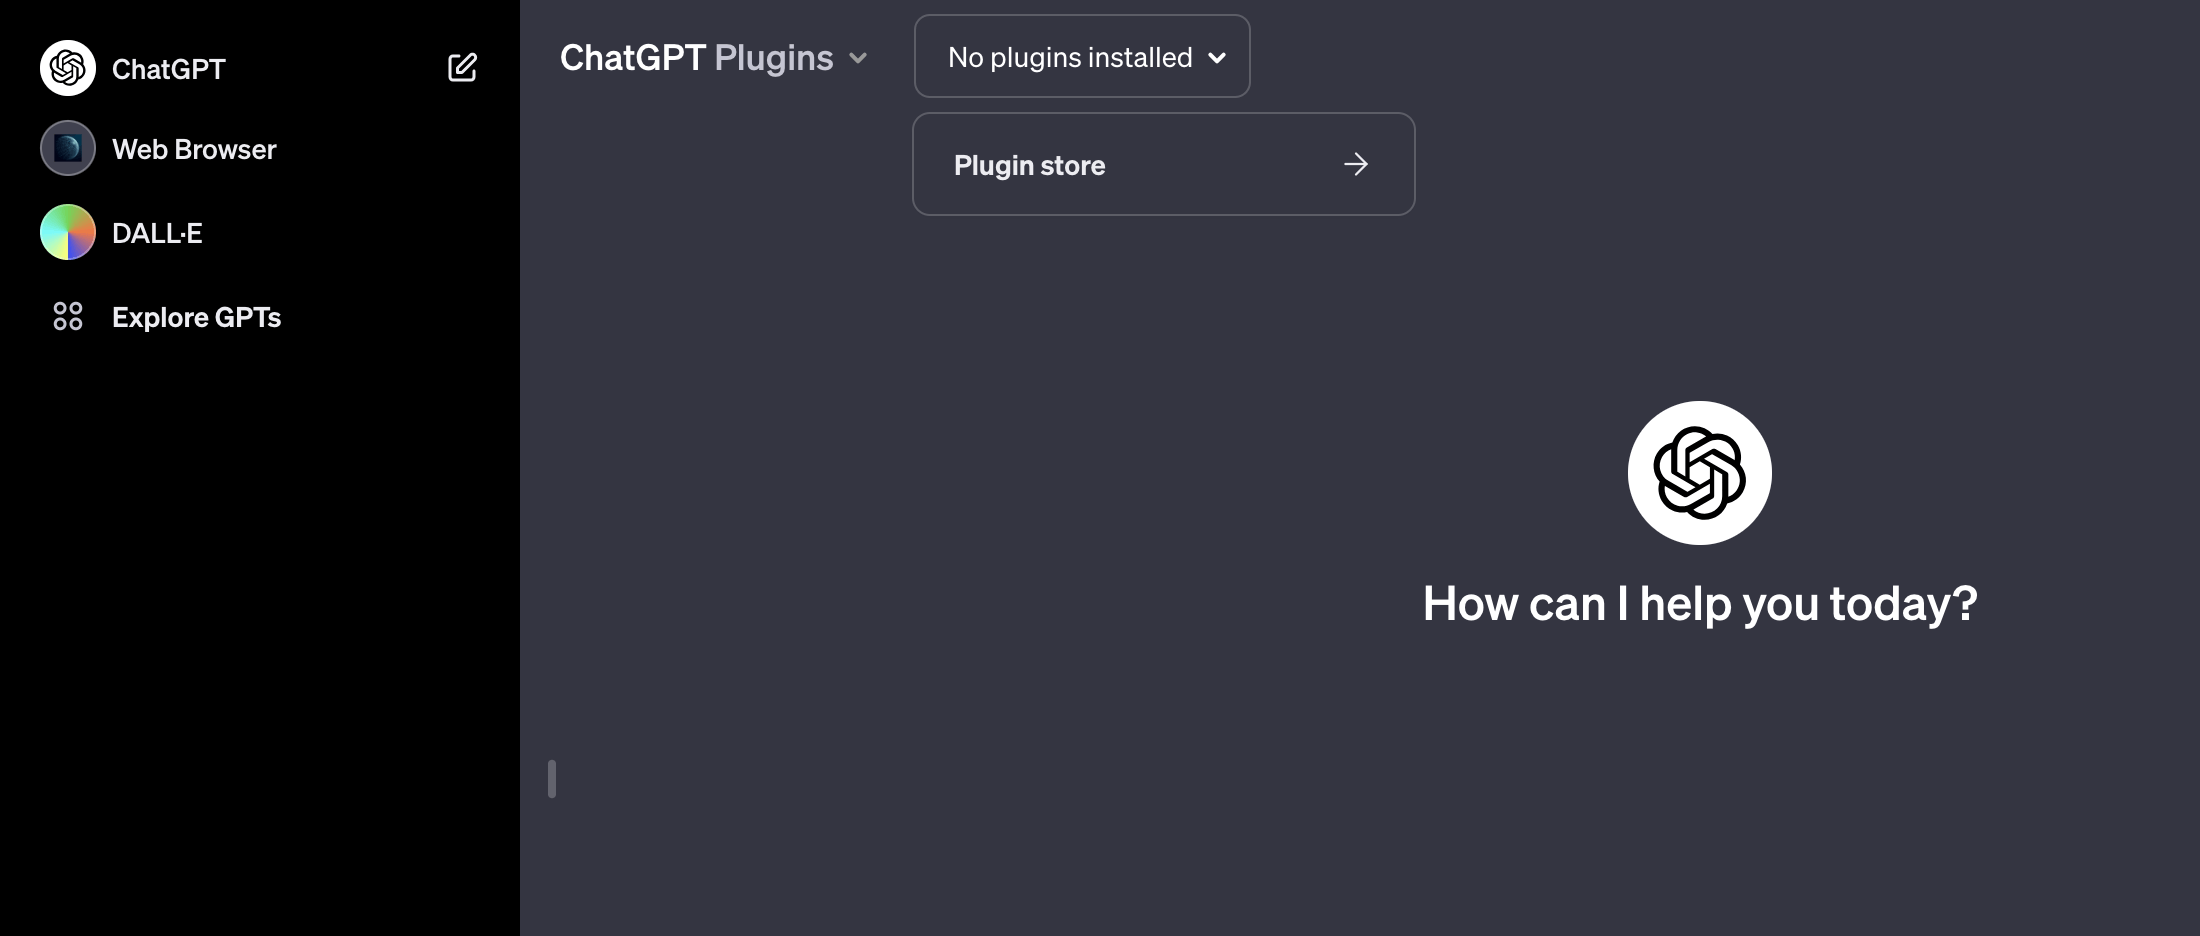 How to install ChatGPT Plugins